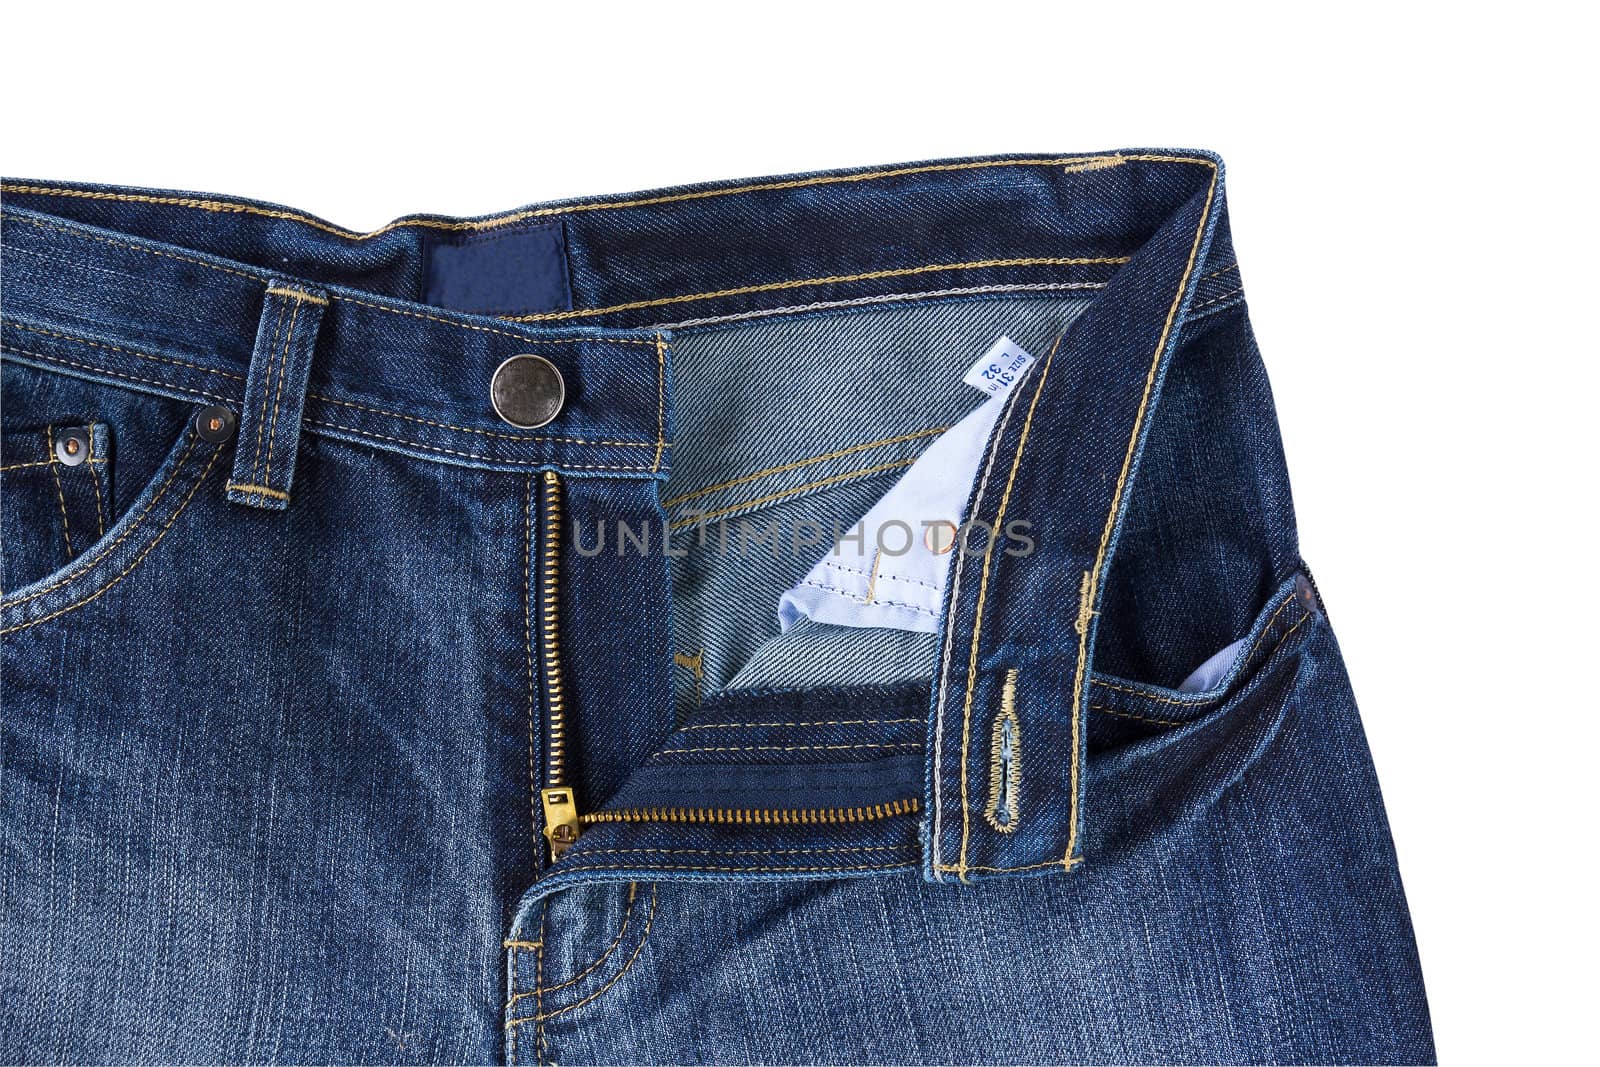 Front Blue jeans open zip isolated on the white background